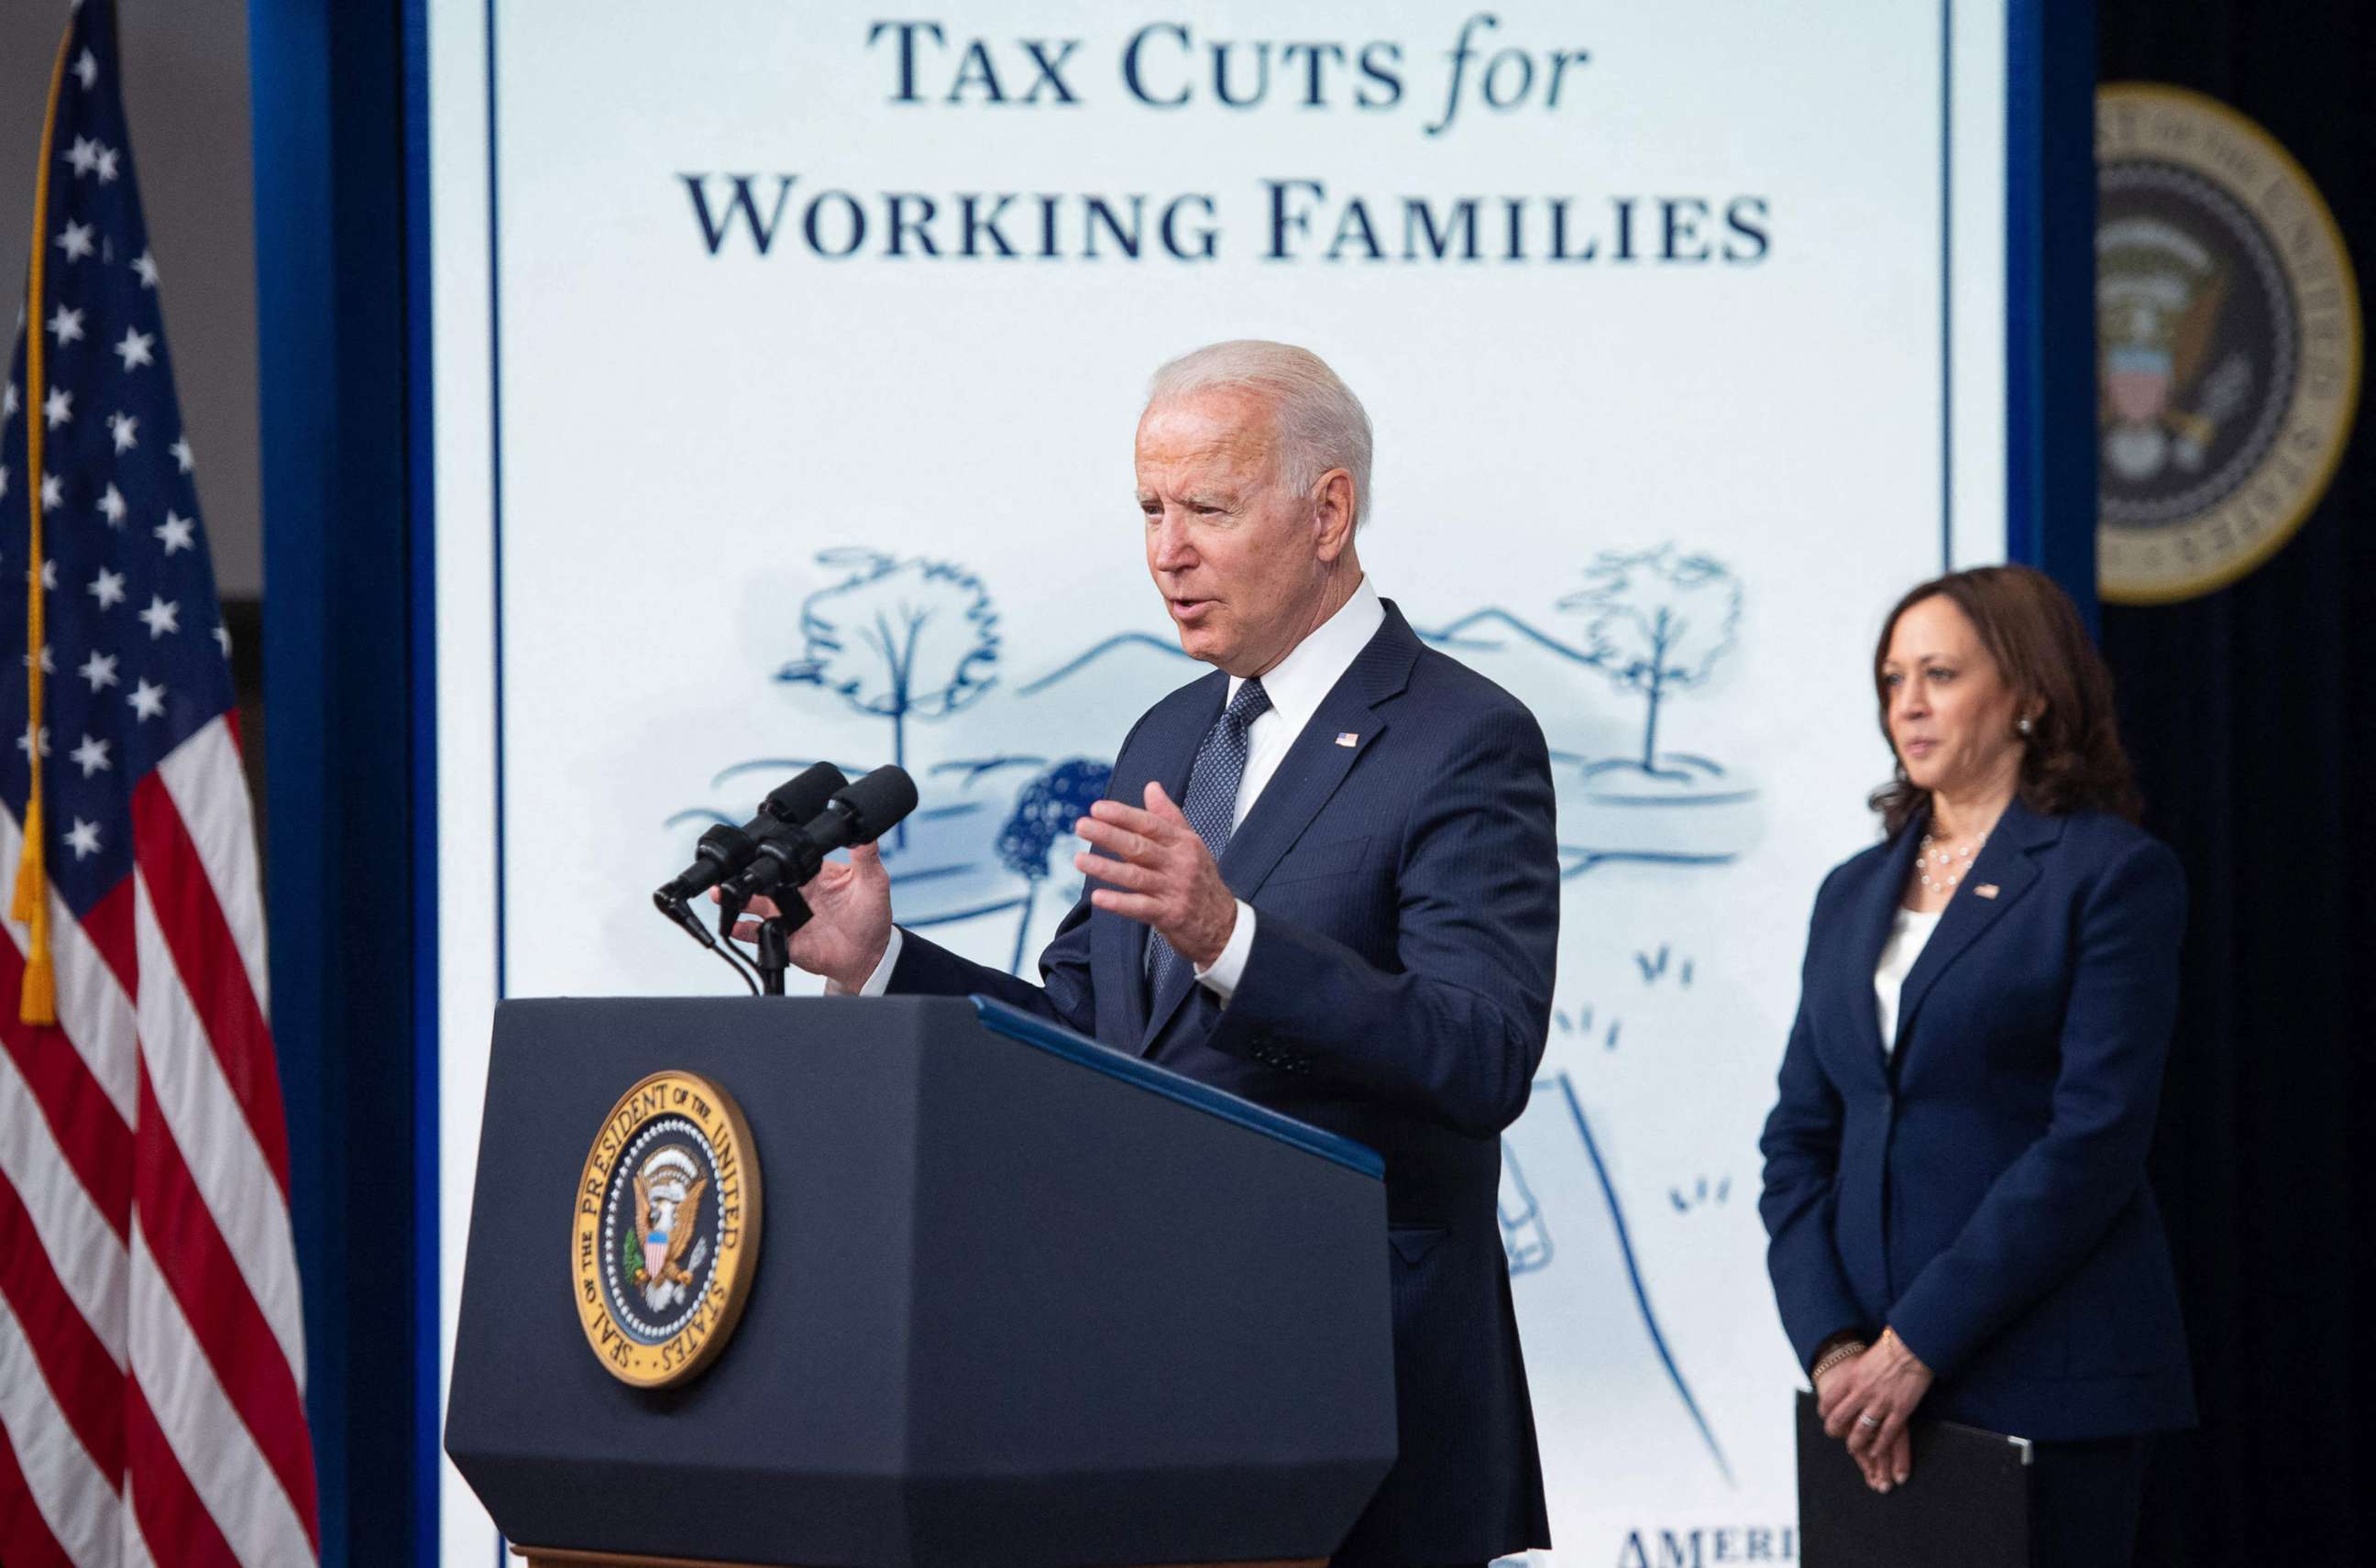 PHOTO: President Joe Biden, with Vice President Kamala Harris, speaks about the Child Tax Credit relief payments that are part of the American Rescue Plan during an event in Washington, D.C., July 15, 2021. The payments are schedule to start on July 15.